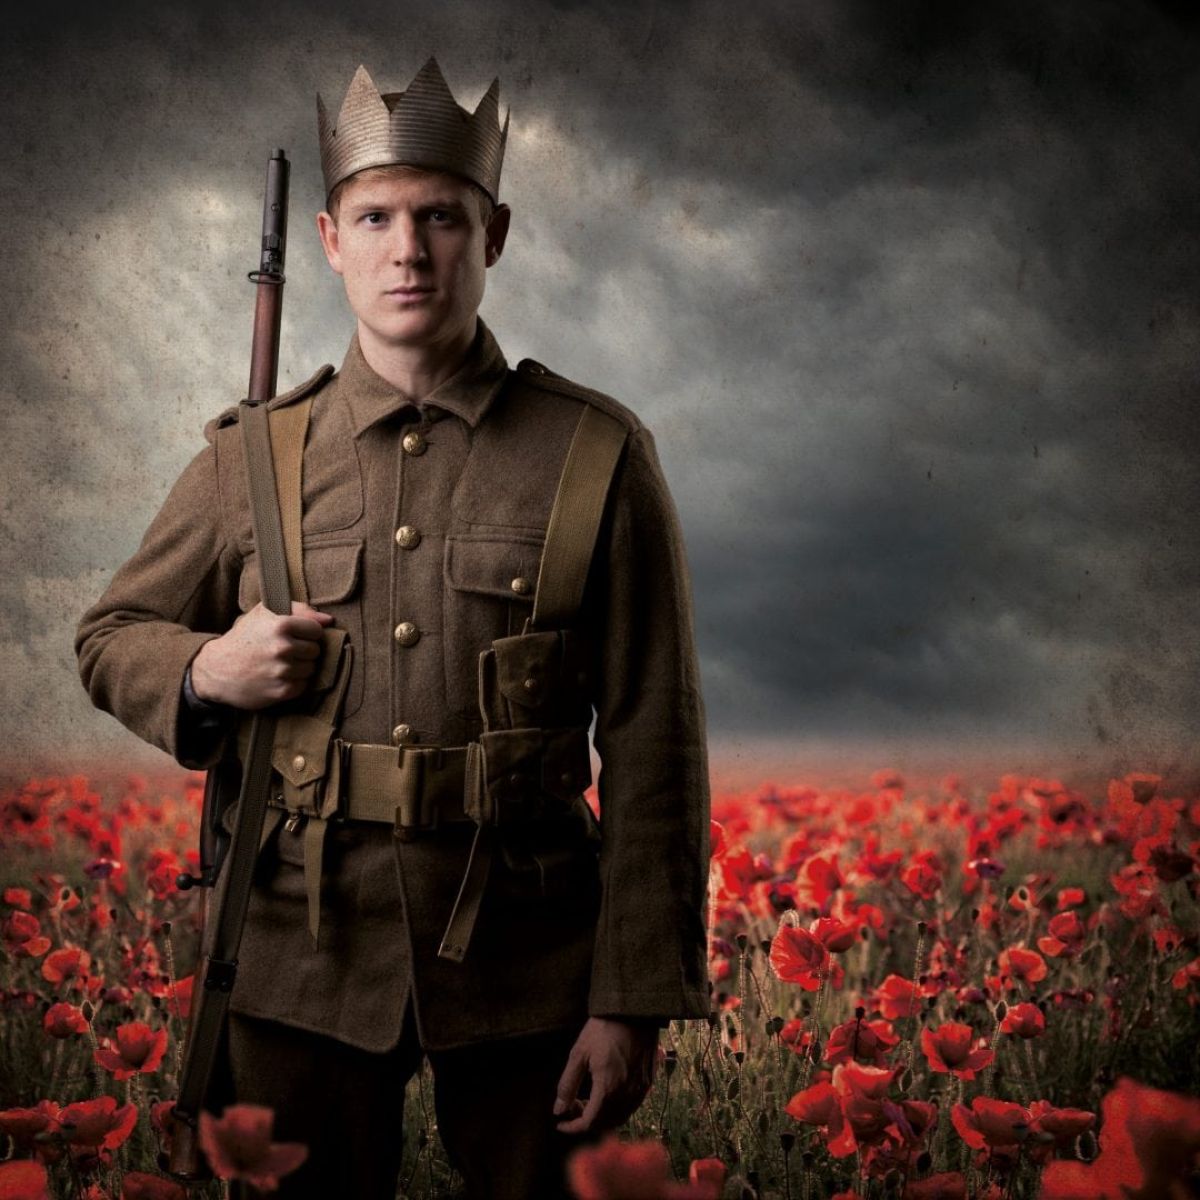 Preview: Antic Disposition’s Henry V Tour